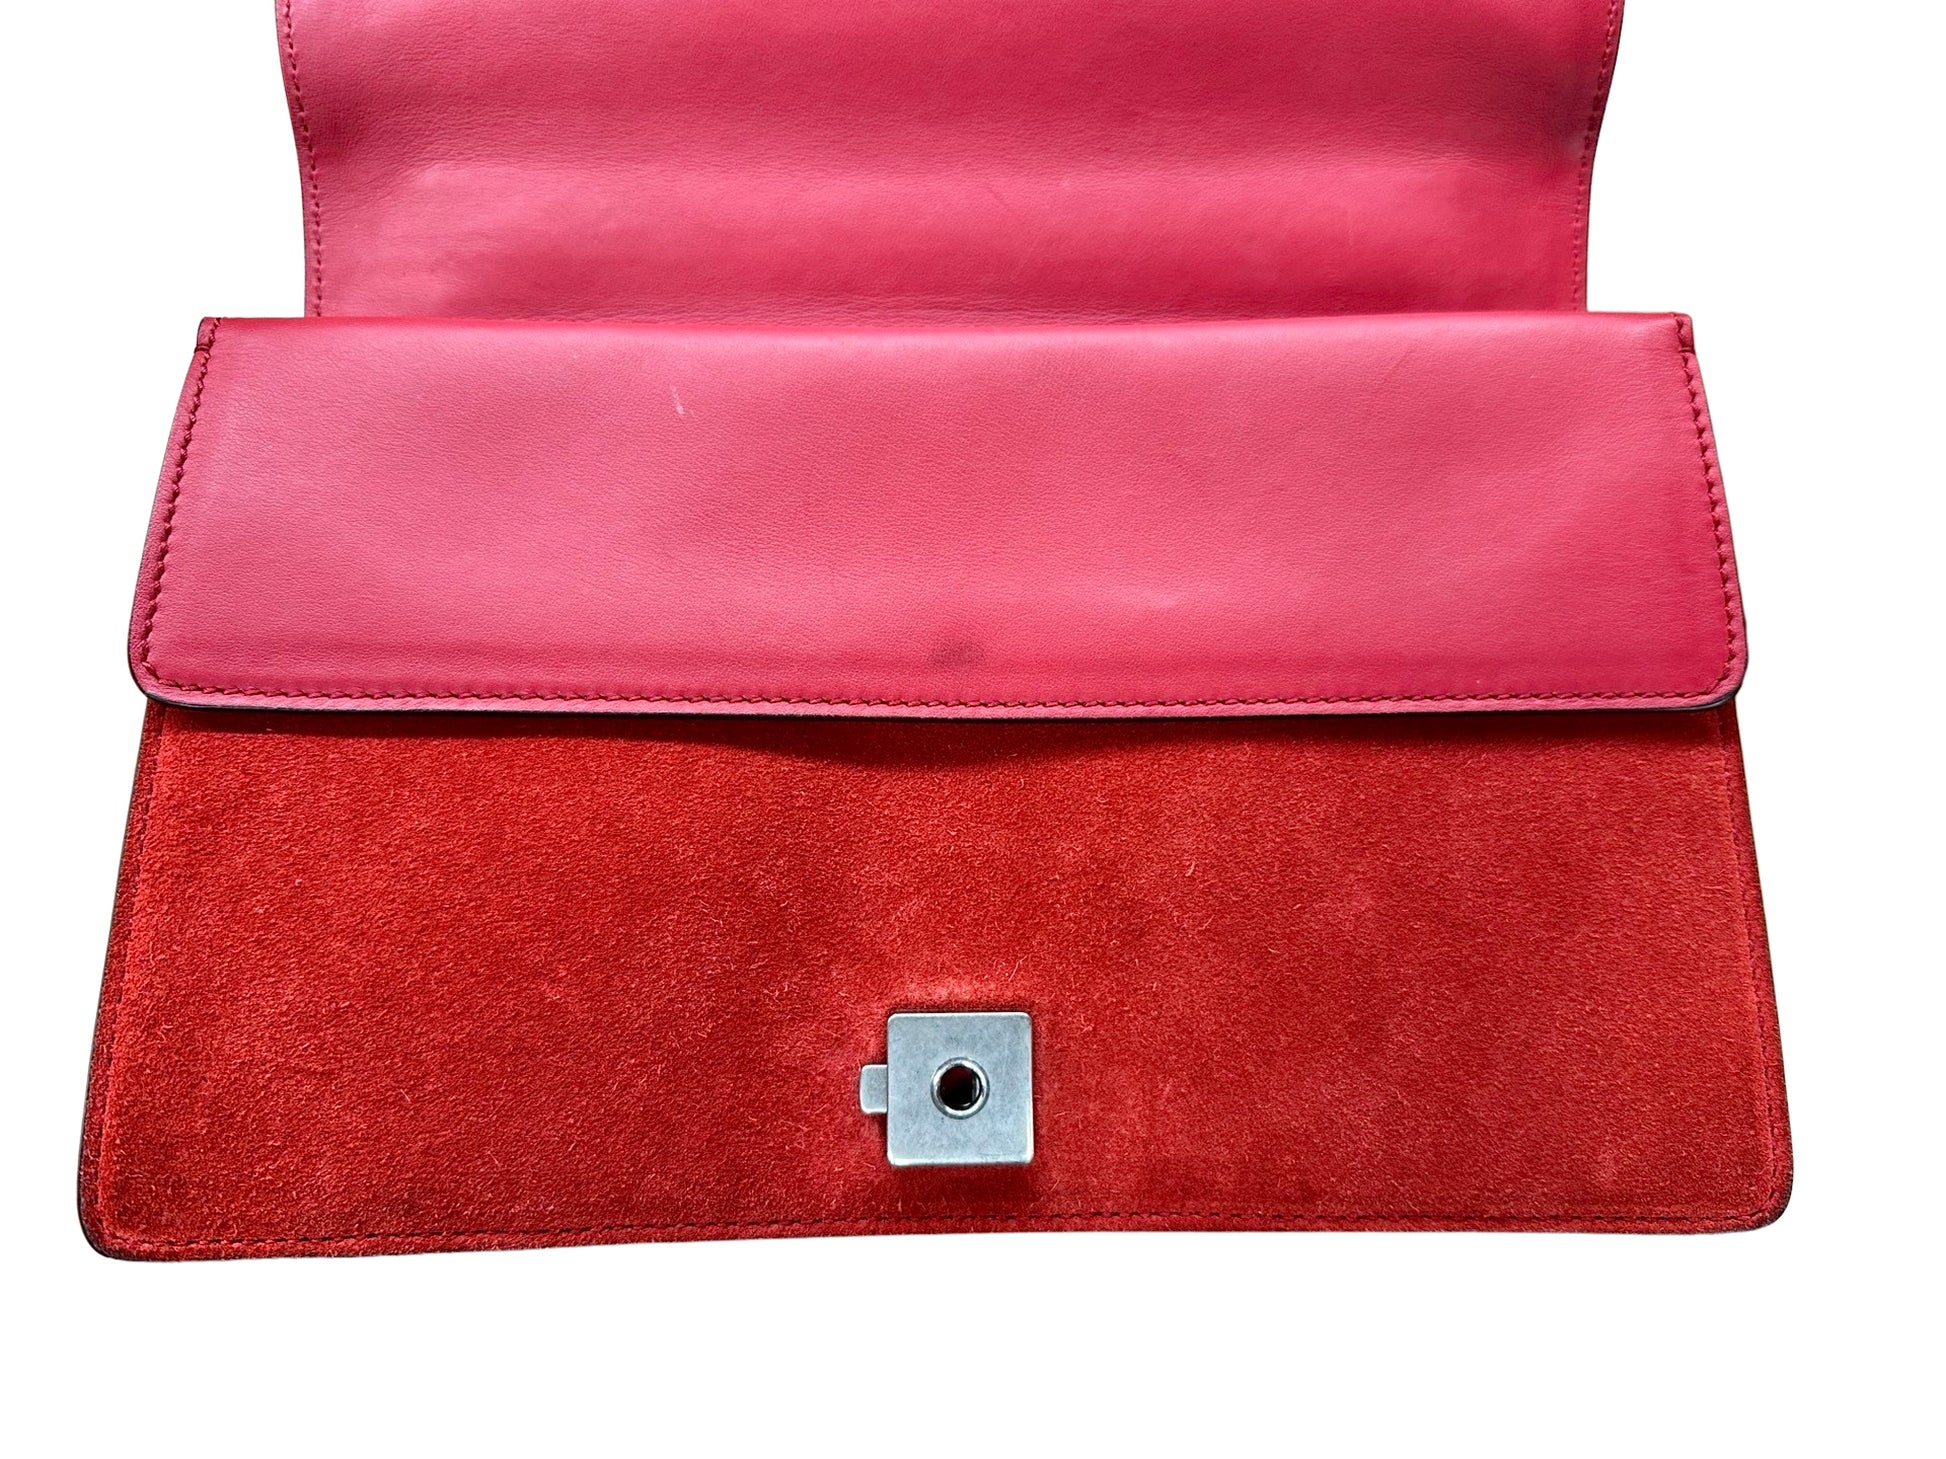 Red leather Inner flap with 2 scuff marks